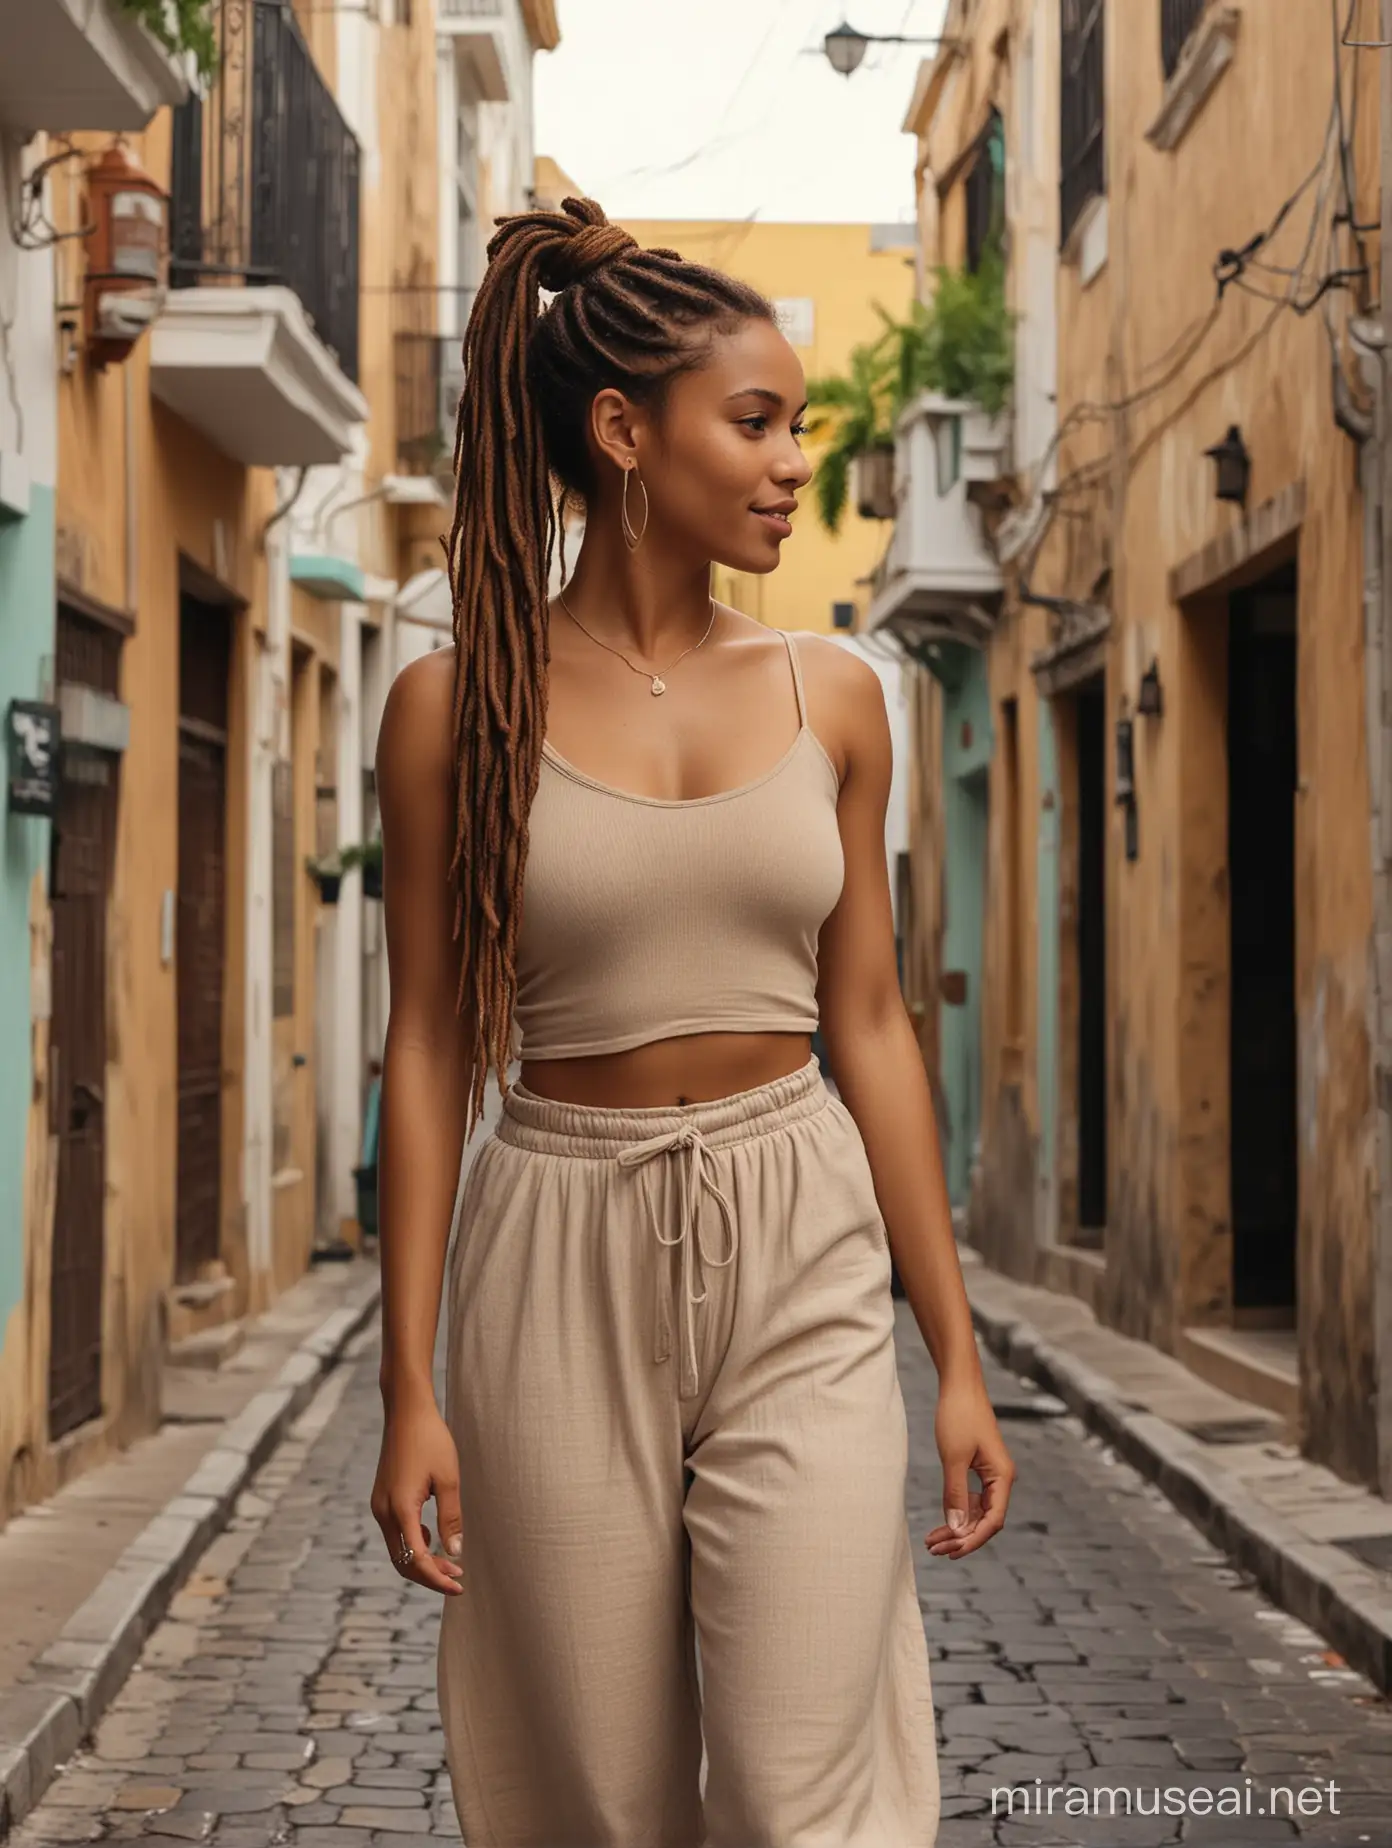 the carribean, caramel skin woman with ponytail dreadlocks is walking in the beautiful carribean street,in the style of light brown and dark black, fashwave, mesoamerican influences, candid celebrity shots, uhd image, body extensions, natural beauty --ar 69:128 --s 750 --v 5. 2